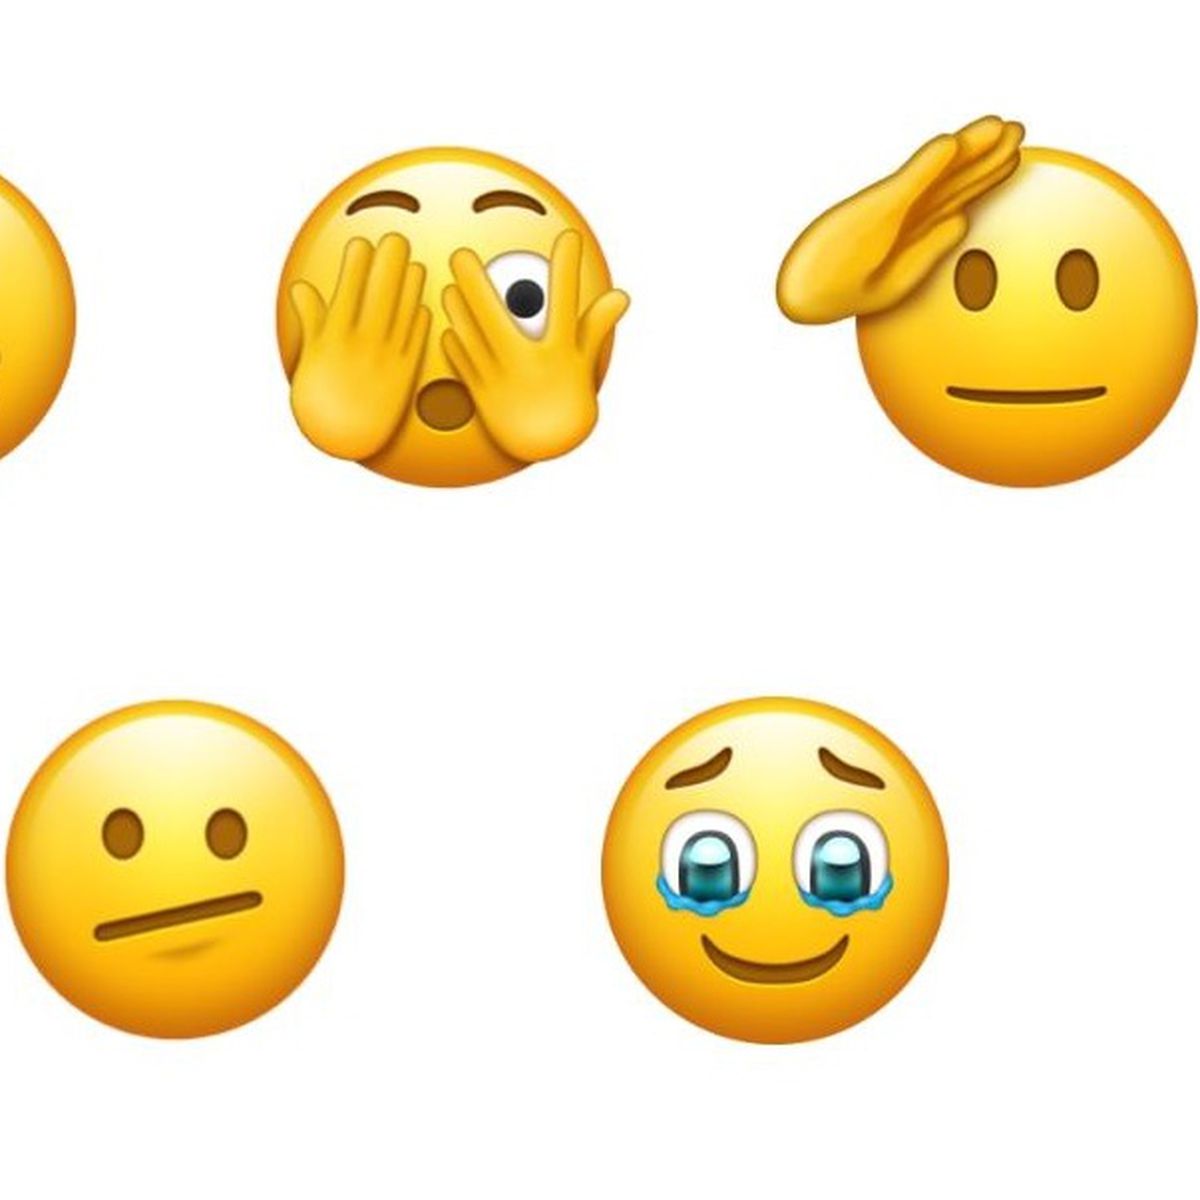 Next Emoji Candidates Include Melting Face Saluting Face Coral Bird S Nest Biting Lip Troll Bubbles And More Macrumors